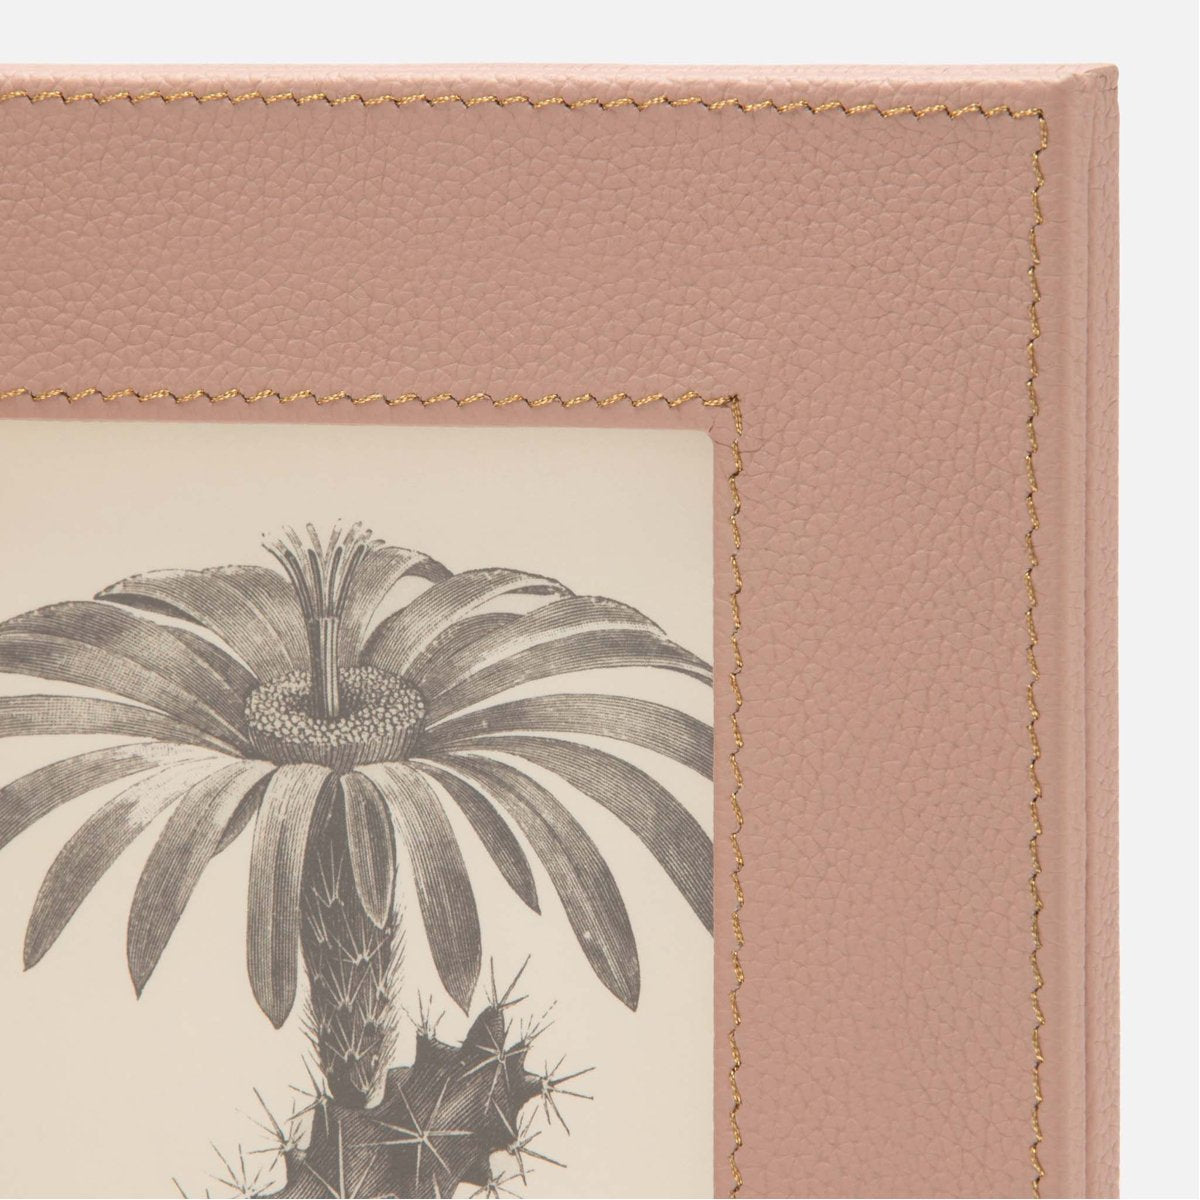 Pigeon and Poodle Dessie Full-Grain Leather Double Frame, 4x6 Image